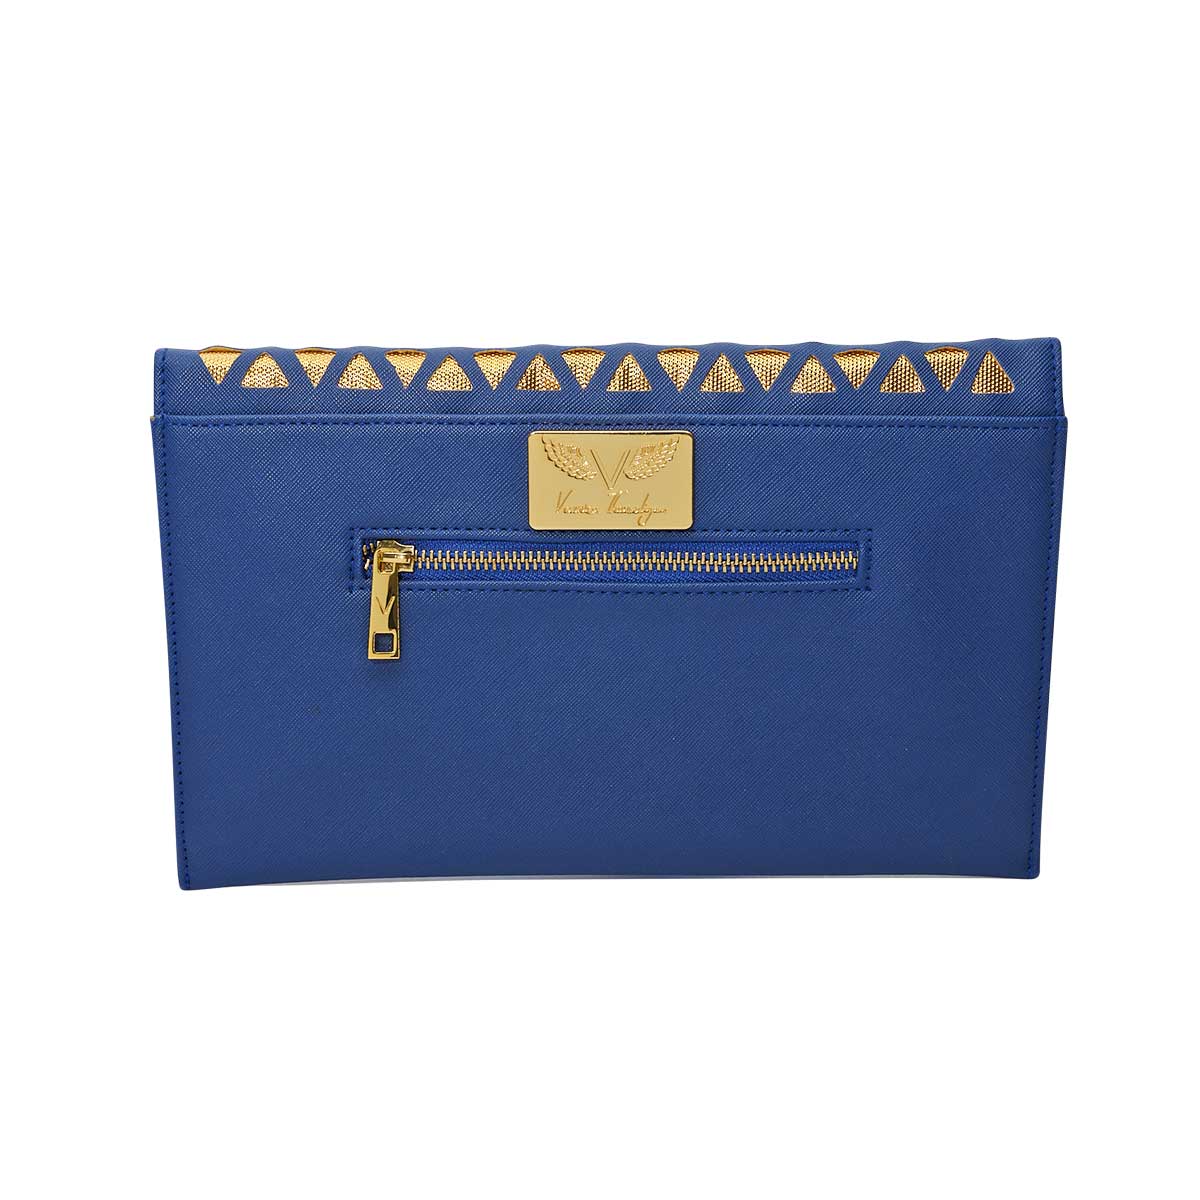 Nisha bag Faux leather Navy blue and gold pochette with chain strap. Hook on strap for multiple positions. Rani collection by Veronica Tharmalingam. Back view of the clutch with zipper for added storage space.